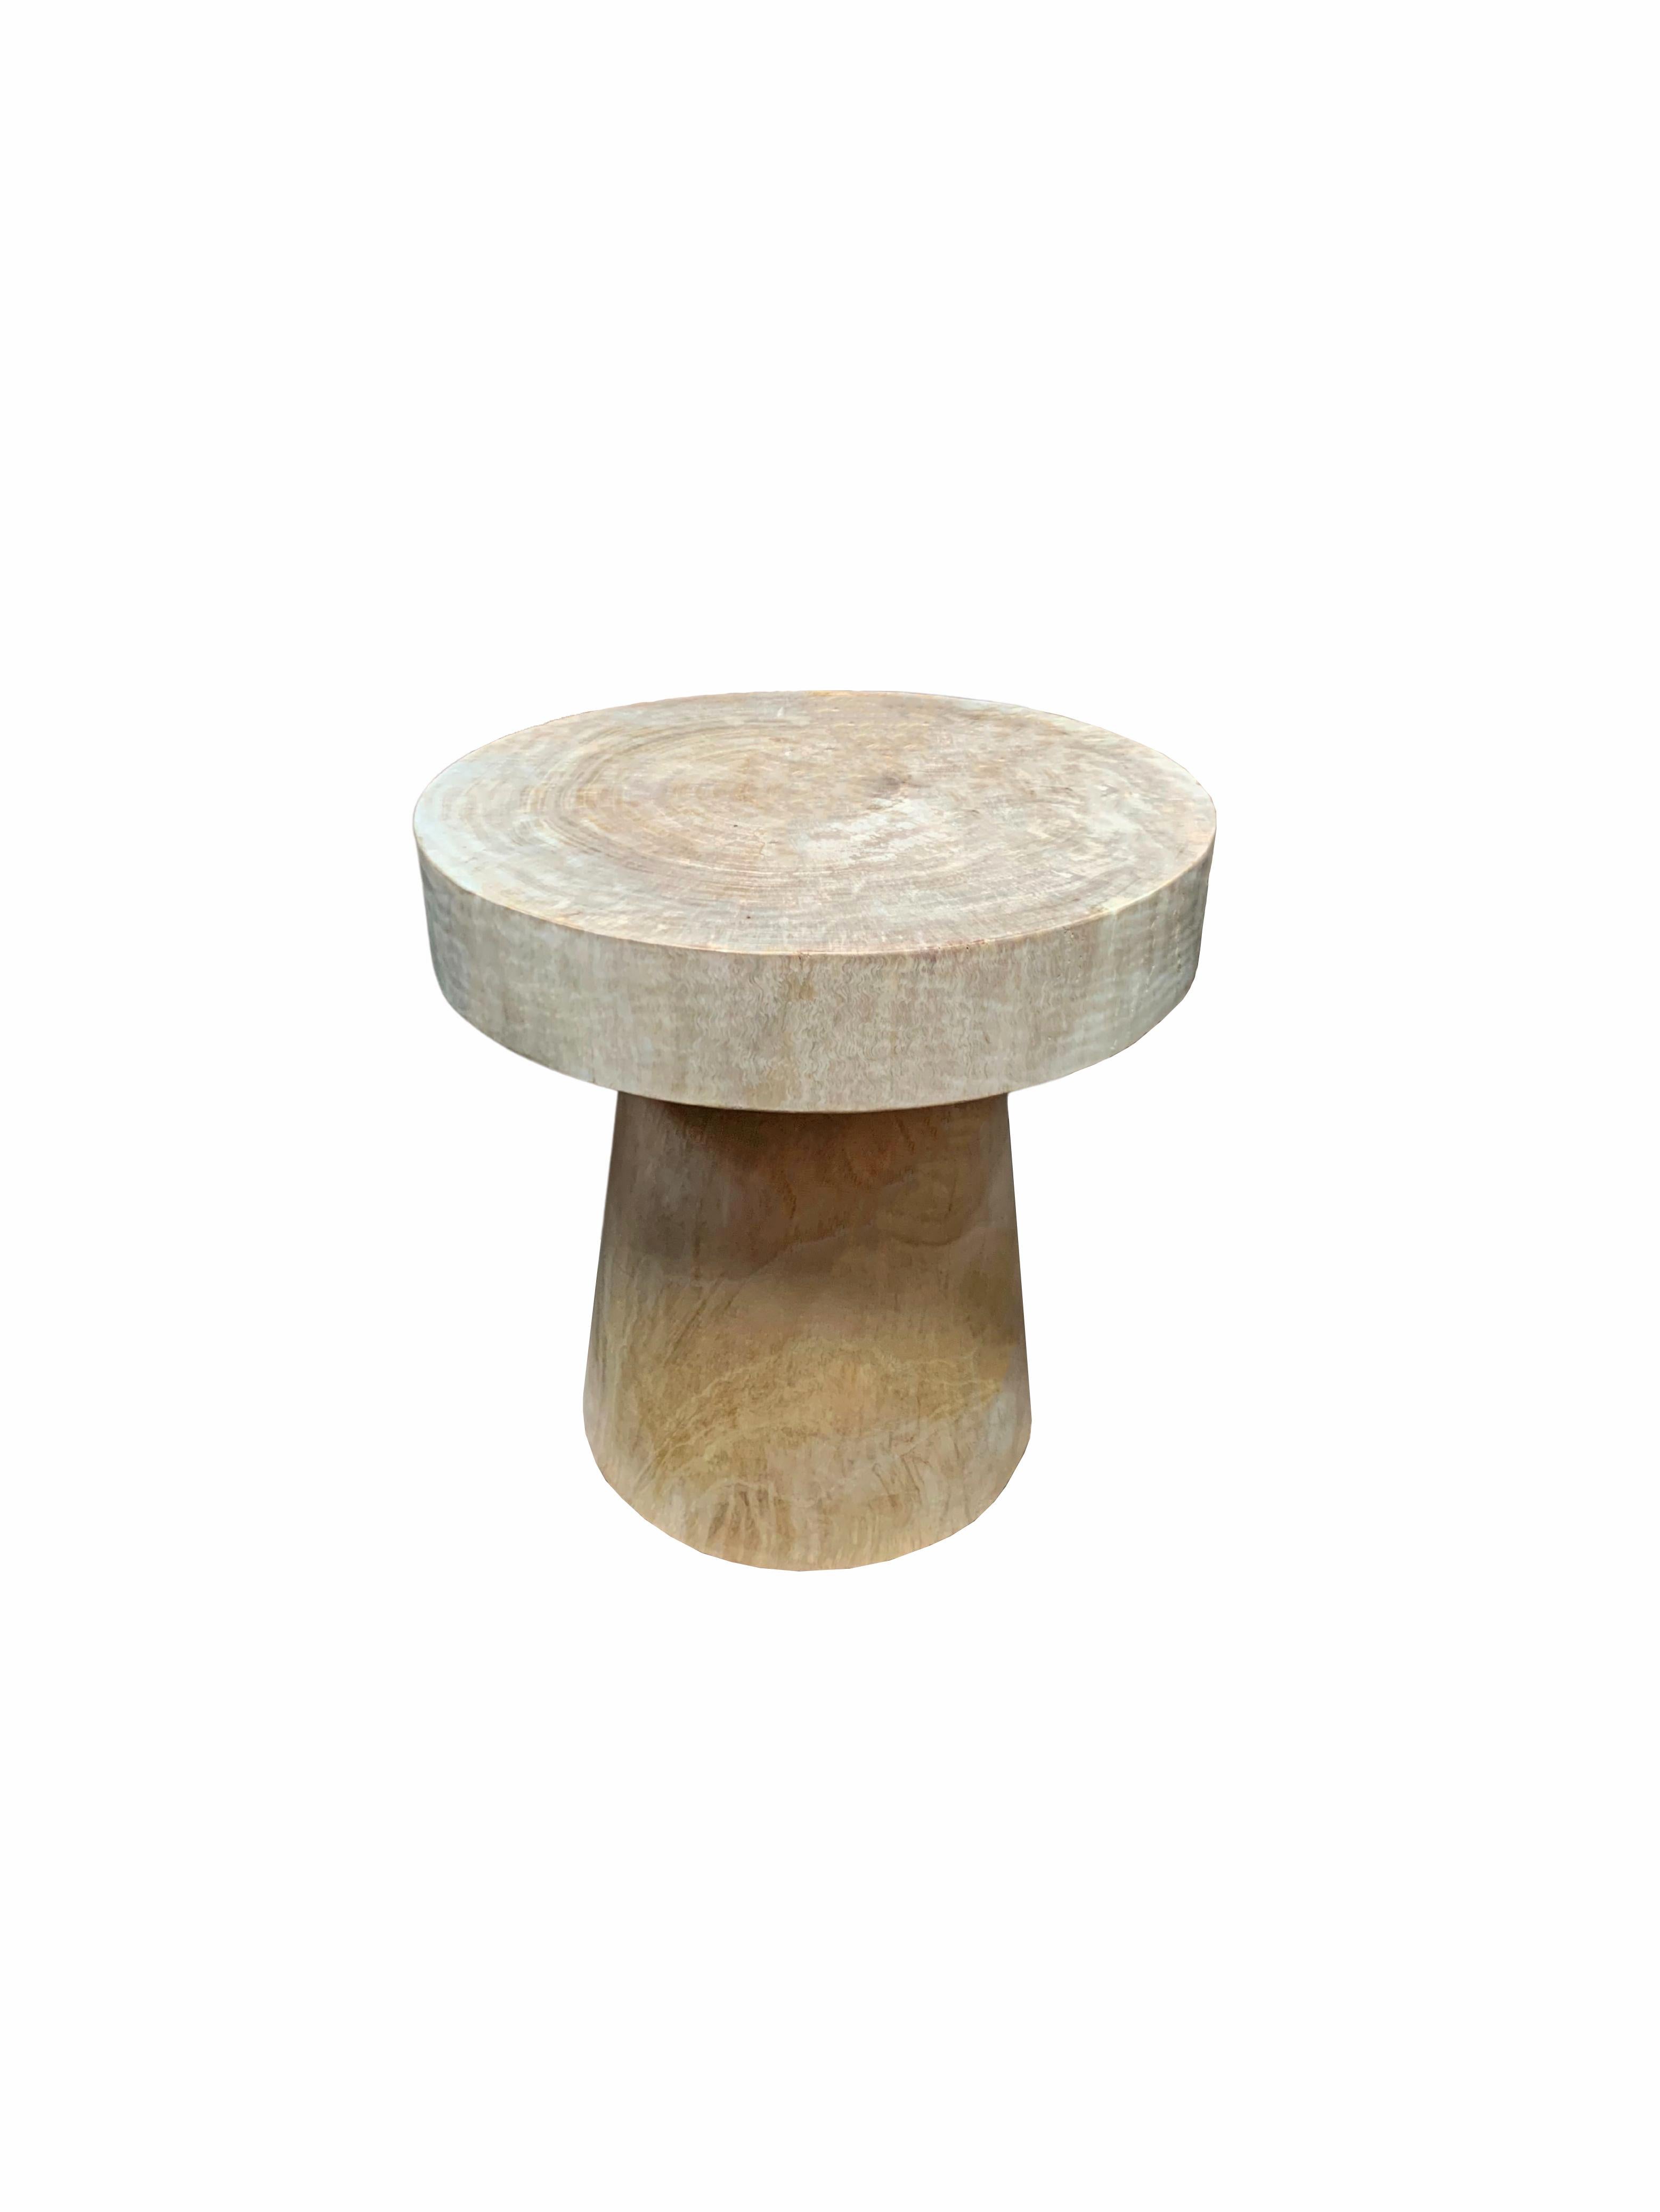 A wonderfully sculptural round side table with clear coated finish. Its neutral pigment and wood texture makes it perfect for any space. It features a tapered base and large round table top. A uniquely sculptural and versatile piece certain to